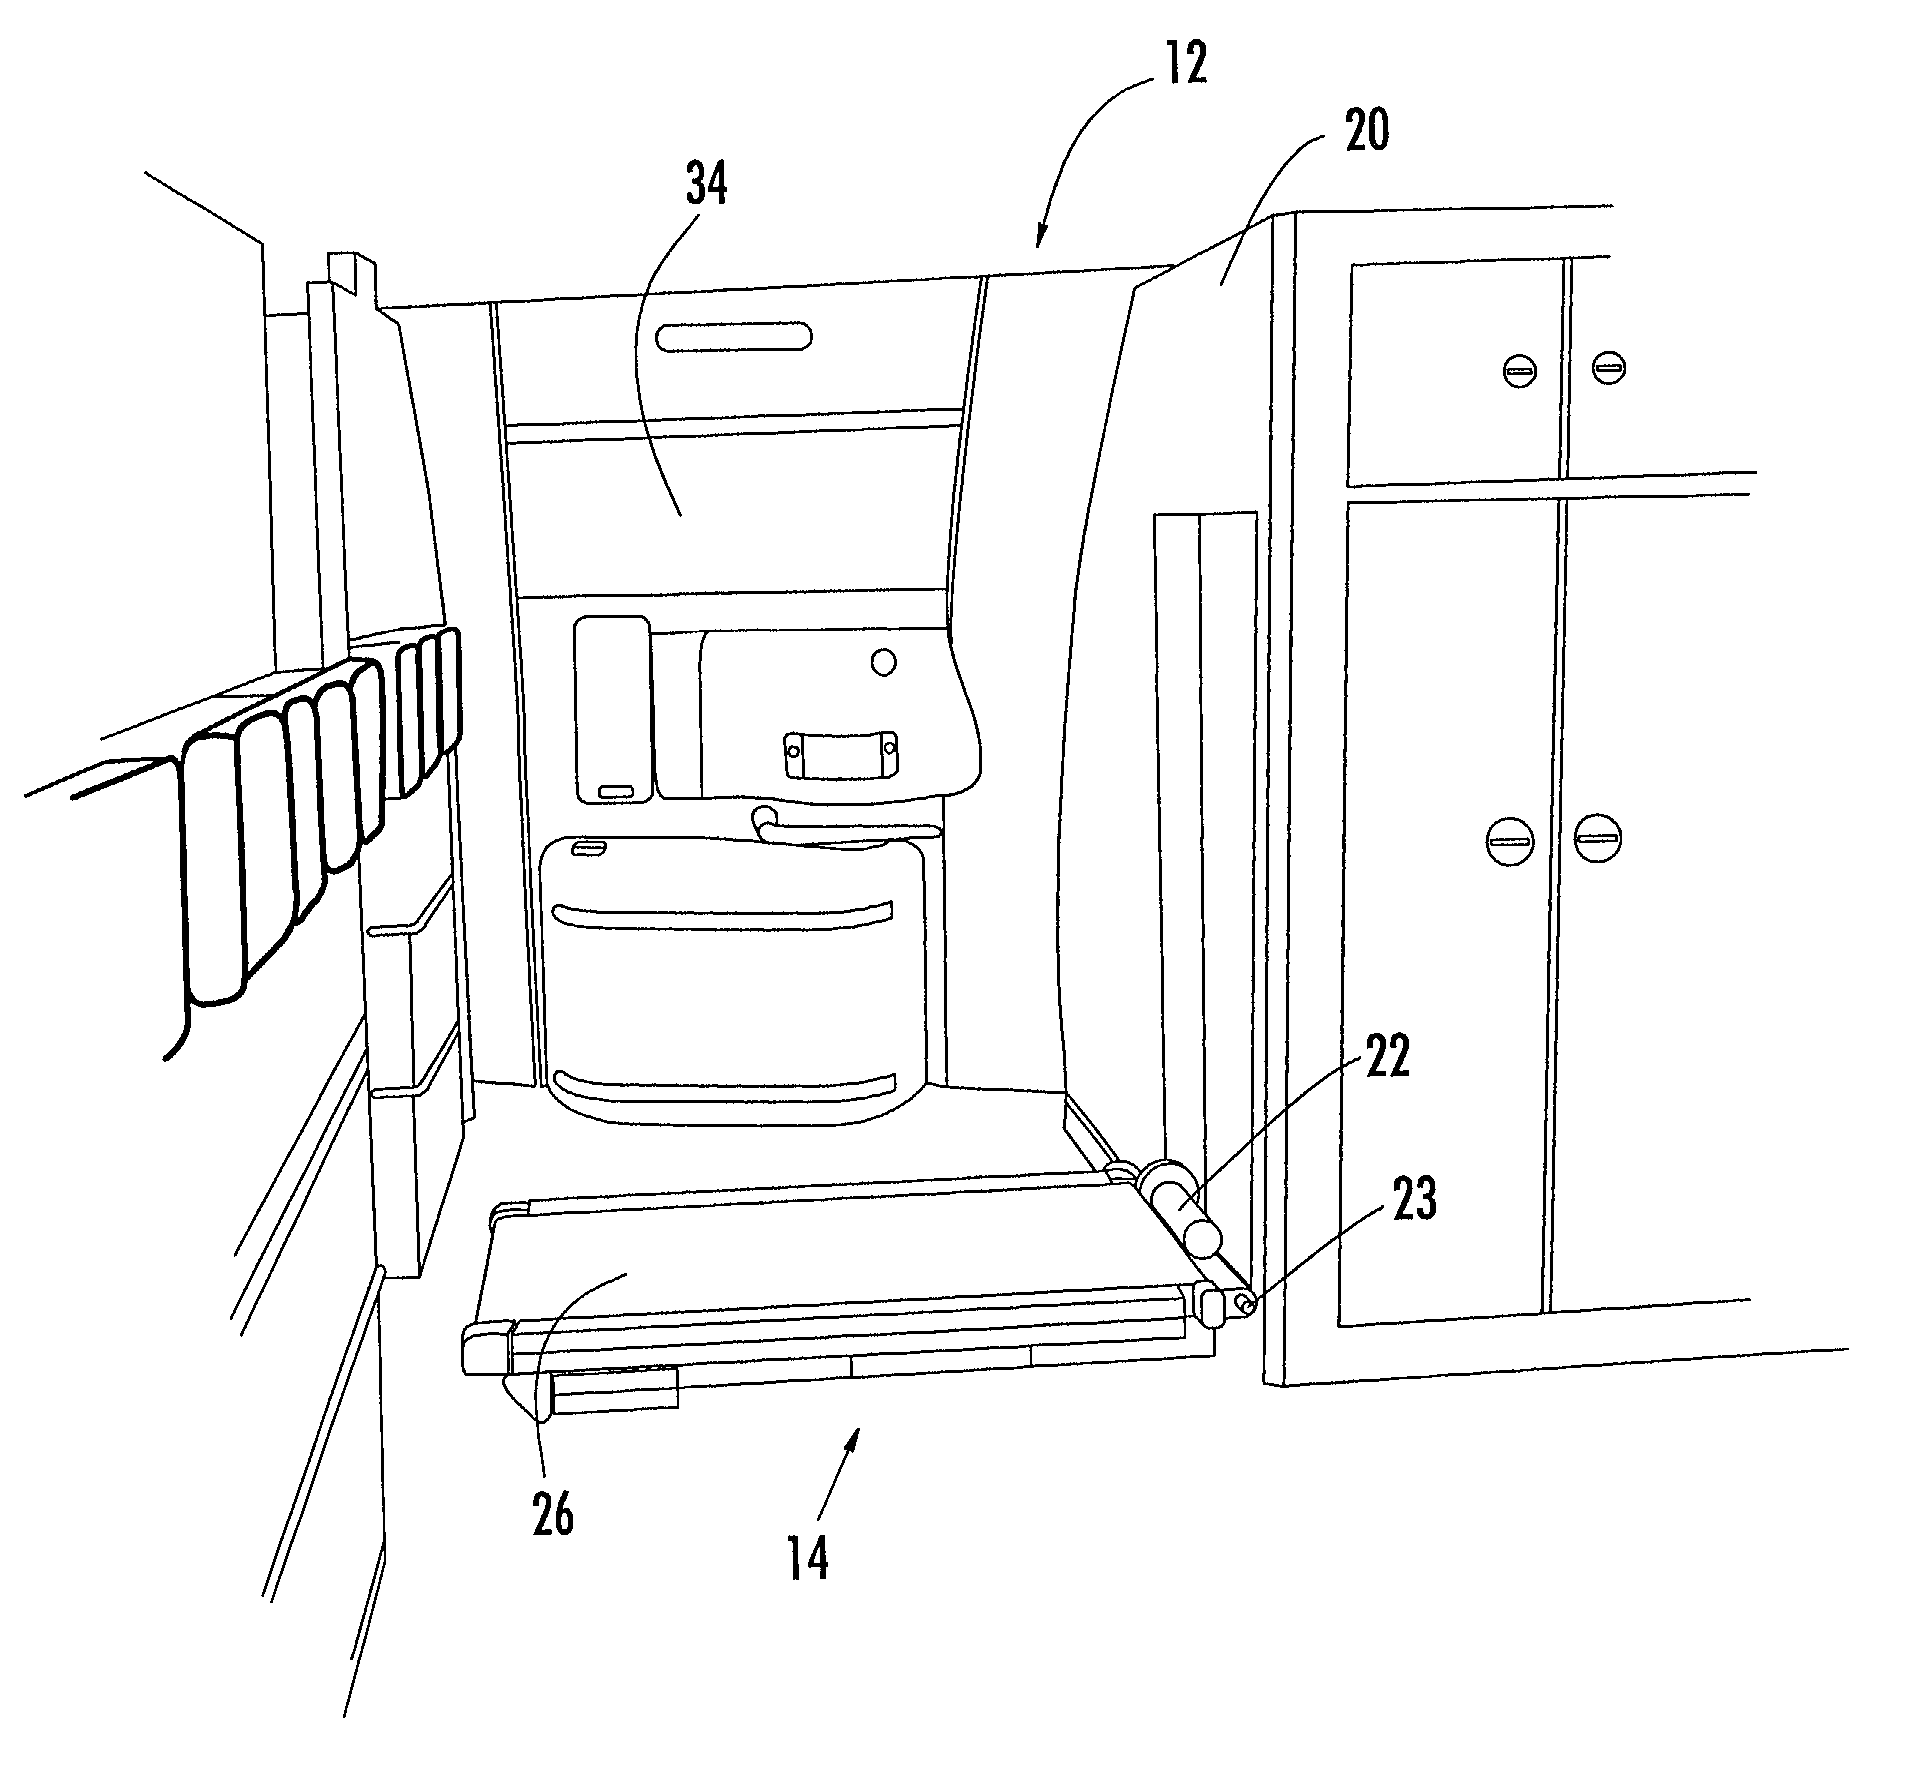 Seating and treadmill exercise device